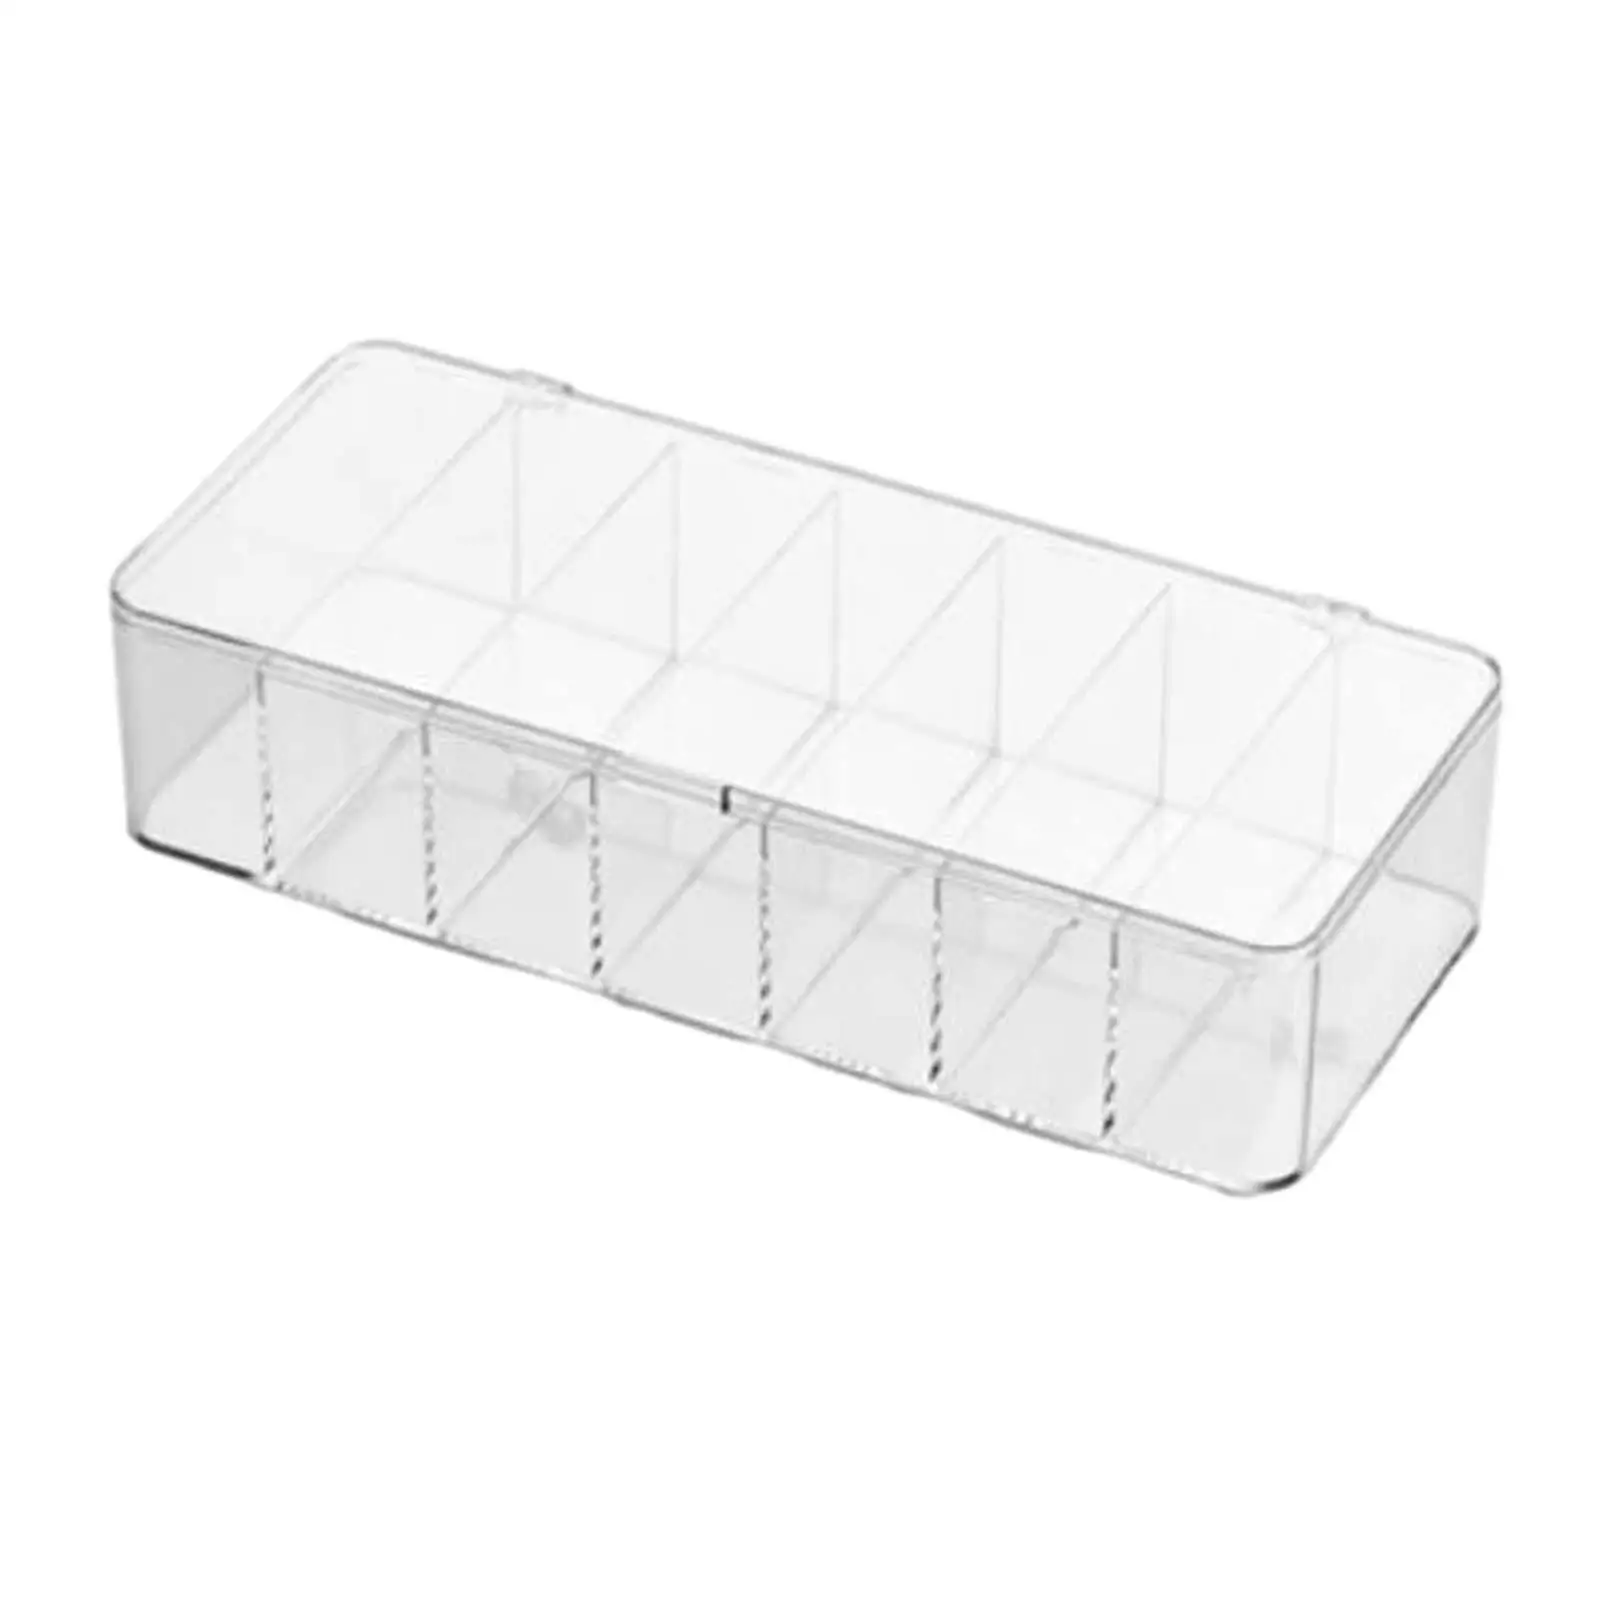 Clear Electronics Organizer Boxes, Acrylic Organizer, Cord Organizer Case, Data Cable Storage Box for Home, Office